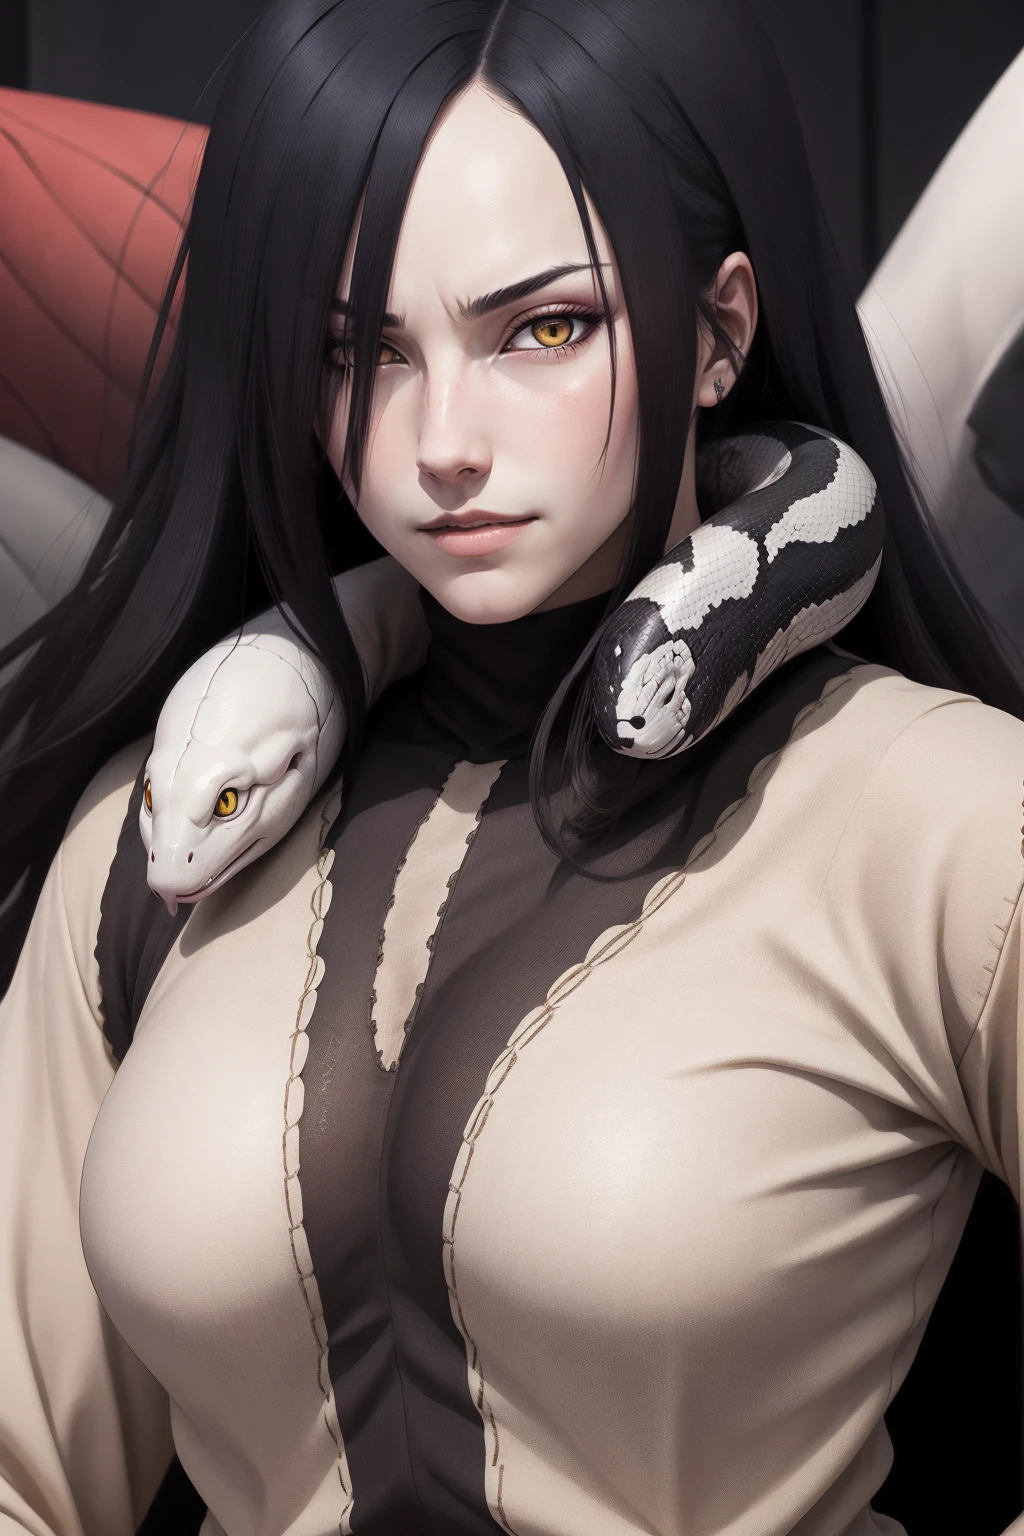 {-erro_de_anatomia:1.0} estilo anime, Masterpiece, absurdities, Orochimaru\(Naruto\), 1girl Solo, Mature woman, Oversized shirt with broad shoulders, Perfect composition, Detailed lips, large breasts, Beautiful face, body proportion, Blush, Long black hair, ( black hair), yellow eyes, Soft gauze, Super realistic, Detailed, photo shoot, Realistic faces and bodies, masterpiece, best quality, best ( white snake) illustration, hyper detailed, 1 girl, solo, glamorous, blushing, whole body, 